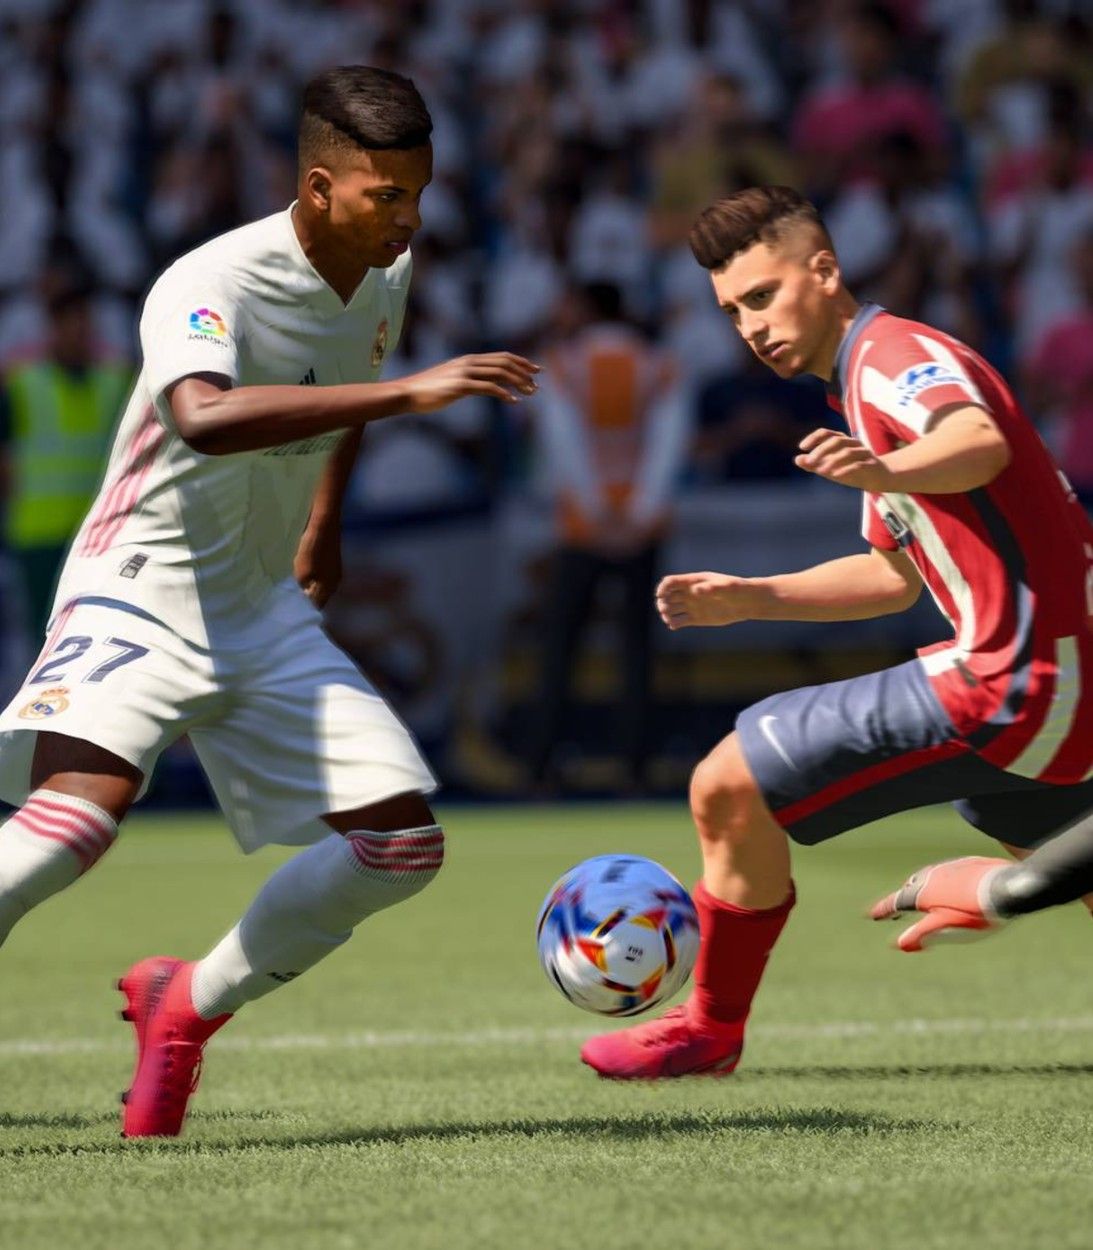 A player dribbles the ball in FIFA 21